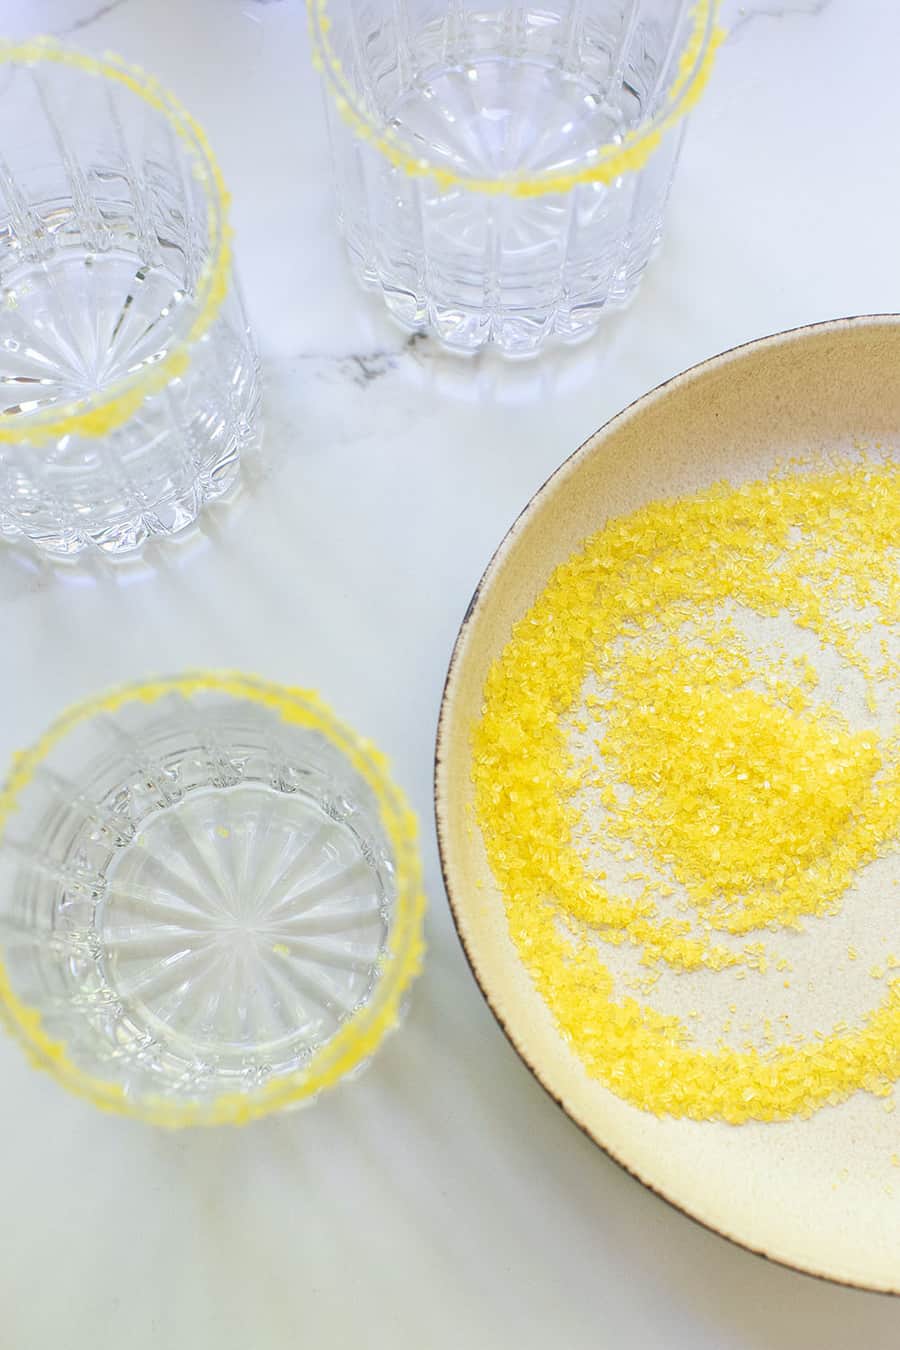 Yellow sugar in a plate with rimmed glasses.